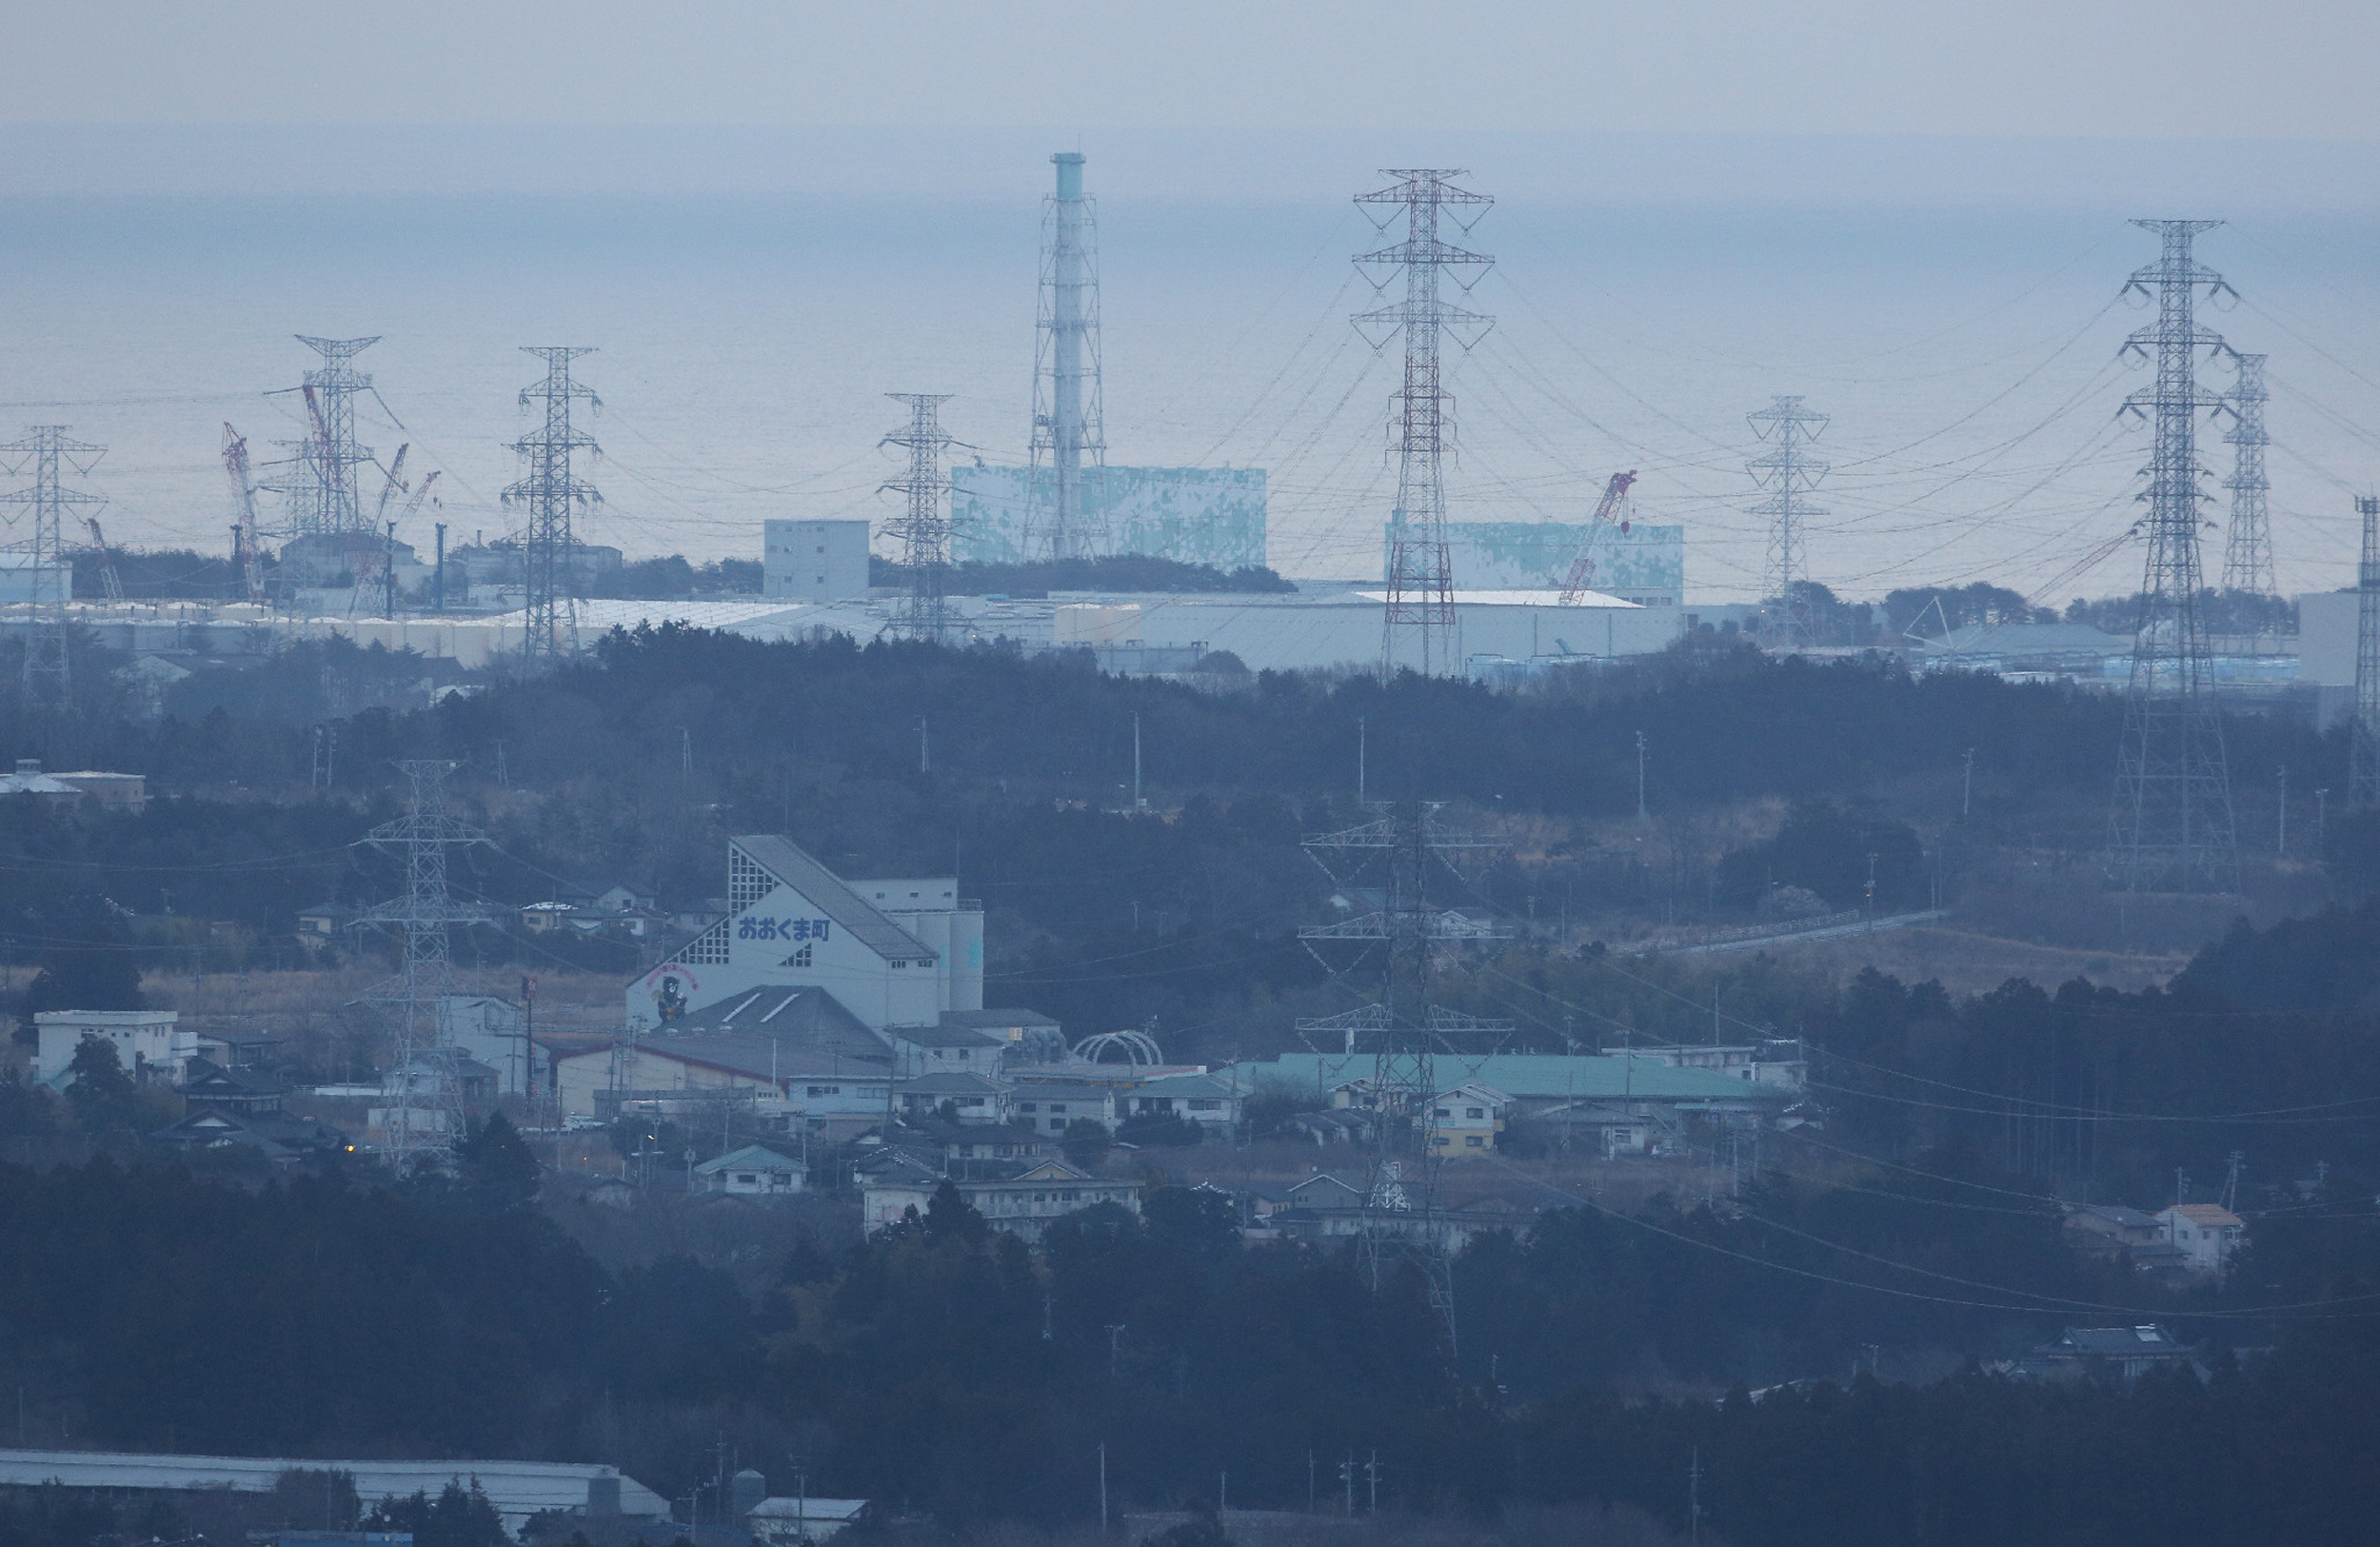 A general view shows the troubled Fukushima Daiichi nuclear power plant (rear) seen from Tomioka town in Fukushima prefecture on March 11, 2016, as people gather to remember the victims of the massive earthquake and tsunami disaster which hit northeastern Japan in 2011. Japan is marking on March 11 the fifth anniversary of the 2011 quake and tsunami that claimed some 18,500 lives, flattened coastal communities and set off the worst atomic crisis in a generation. / AFP PHOTO / JIJI PRESS / JIJI PRESS / Japan OUT